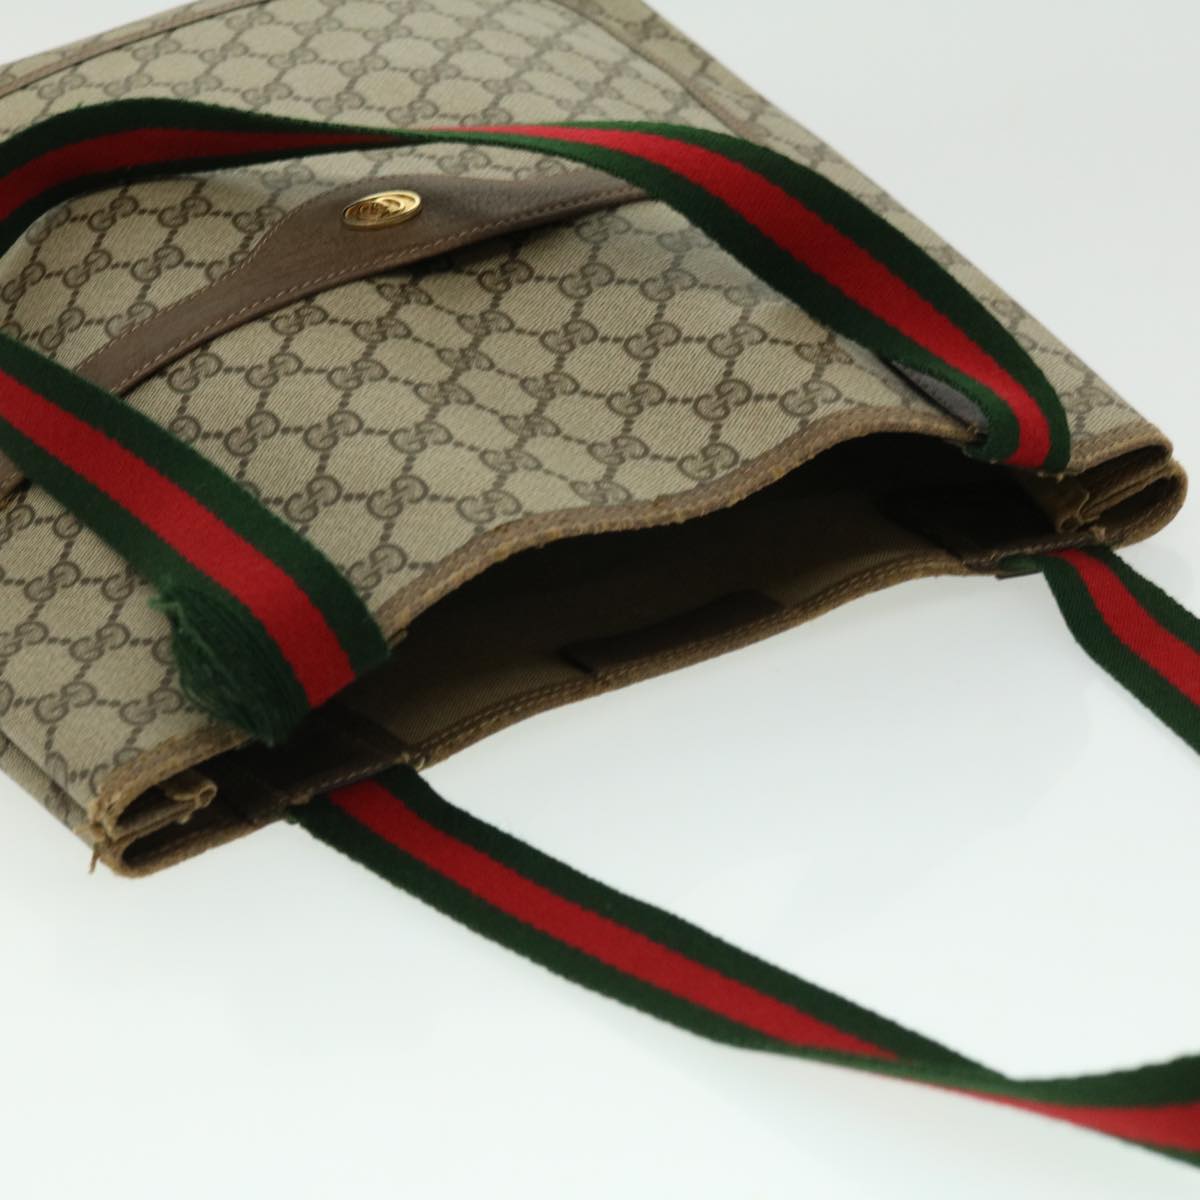 GUCCI GG Canvas Web Sherry Line Tote Bag Beige Red Green 3902003 Auth rd2376